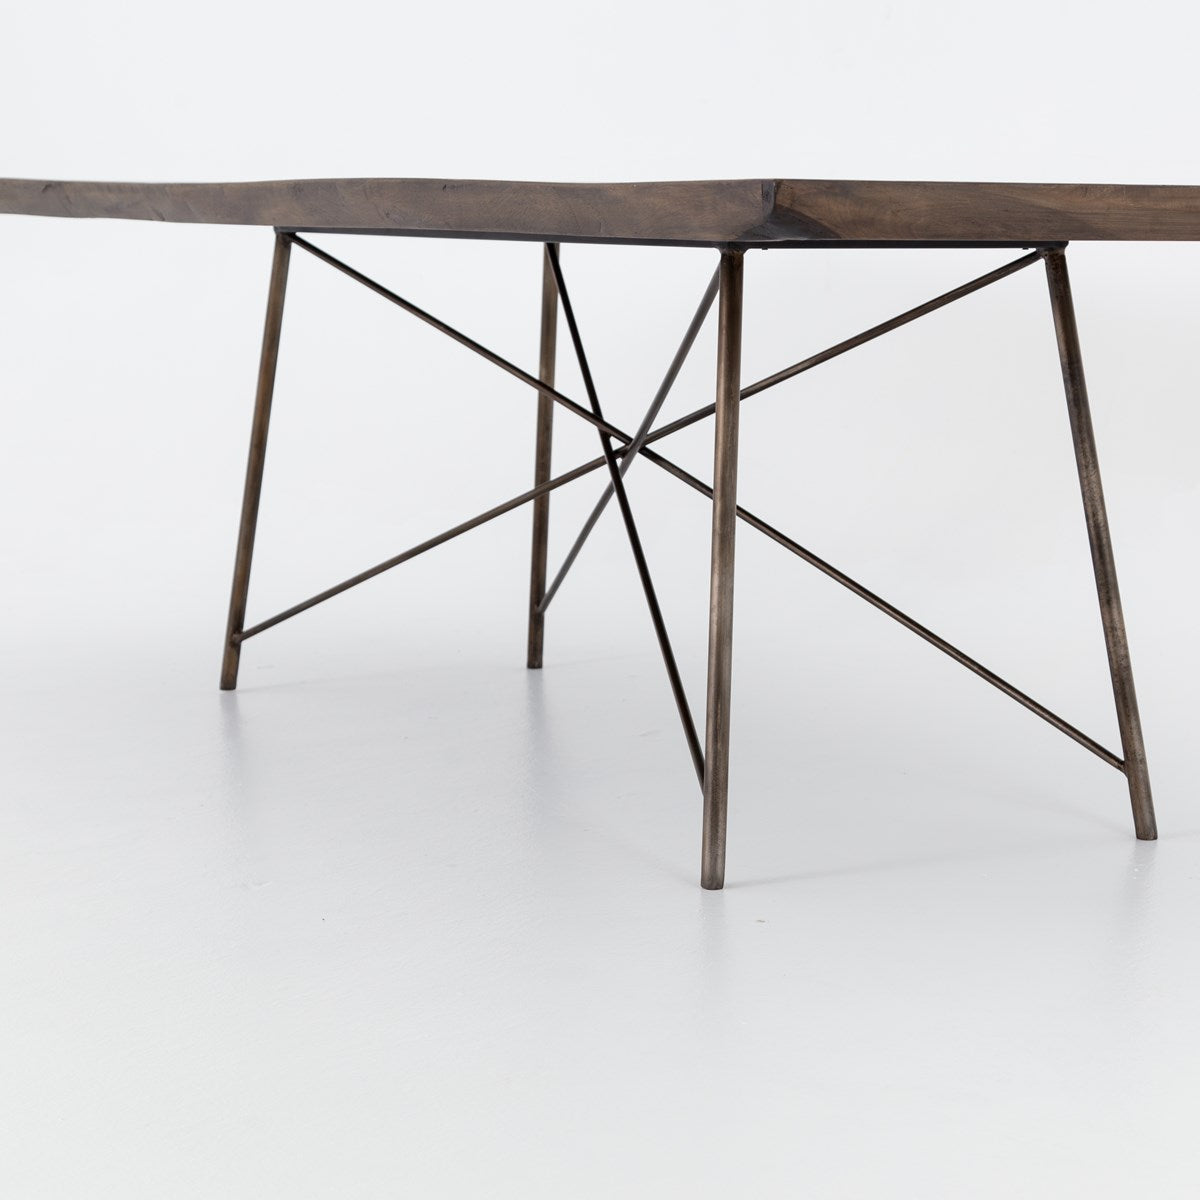 Rocky Dining Table-Bronzed Iron Dining Table Four Hands     Four Hands, Burke Decor, Mid Century Modern Furniture, Old Bones Furniture Company, Old Bones Co, Modern Mid Century, Designer Furniture, https://www.oldbonesco.com/